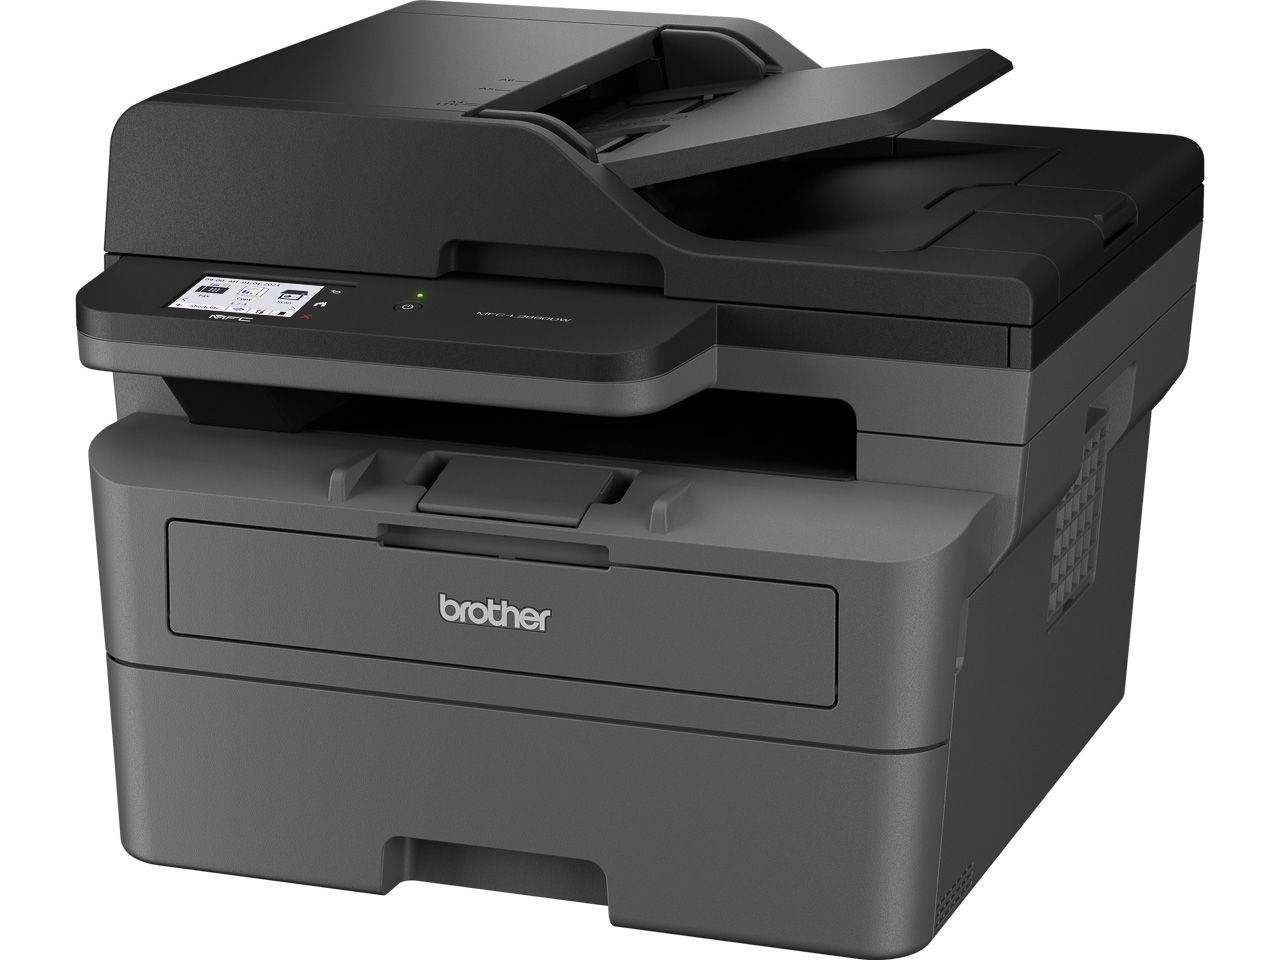 MFCL2860DWRE1 BROTHER MFCL2860DW 4in1 Laser Printer mono A4 LAN Duplex 1